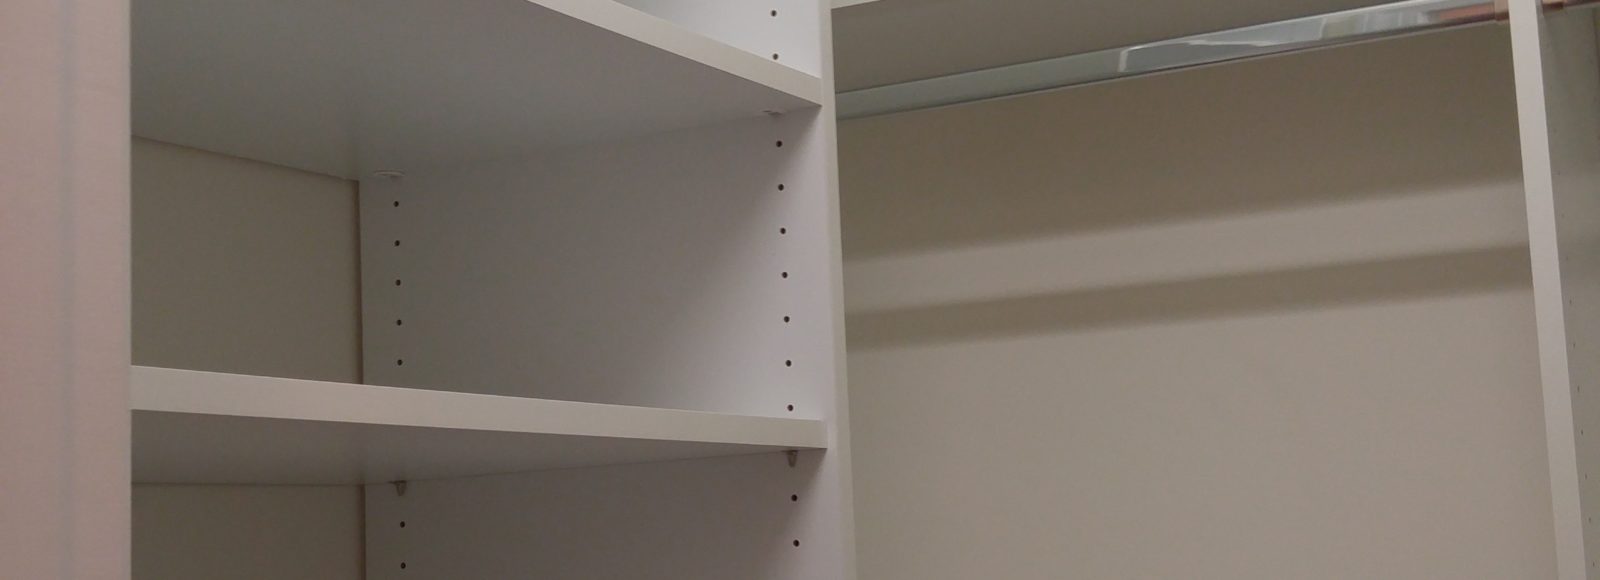 Shelves for Shoes